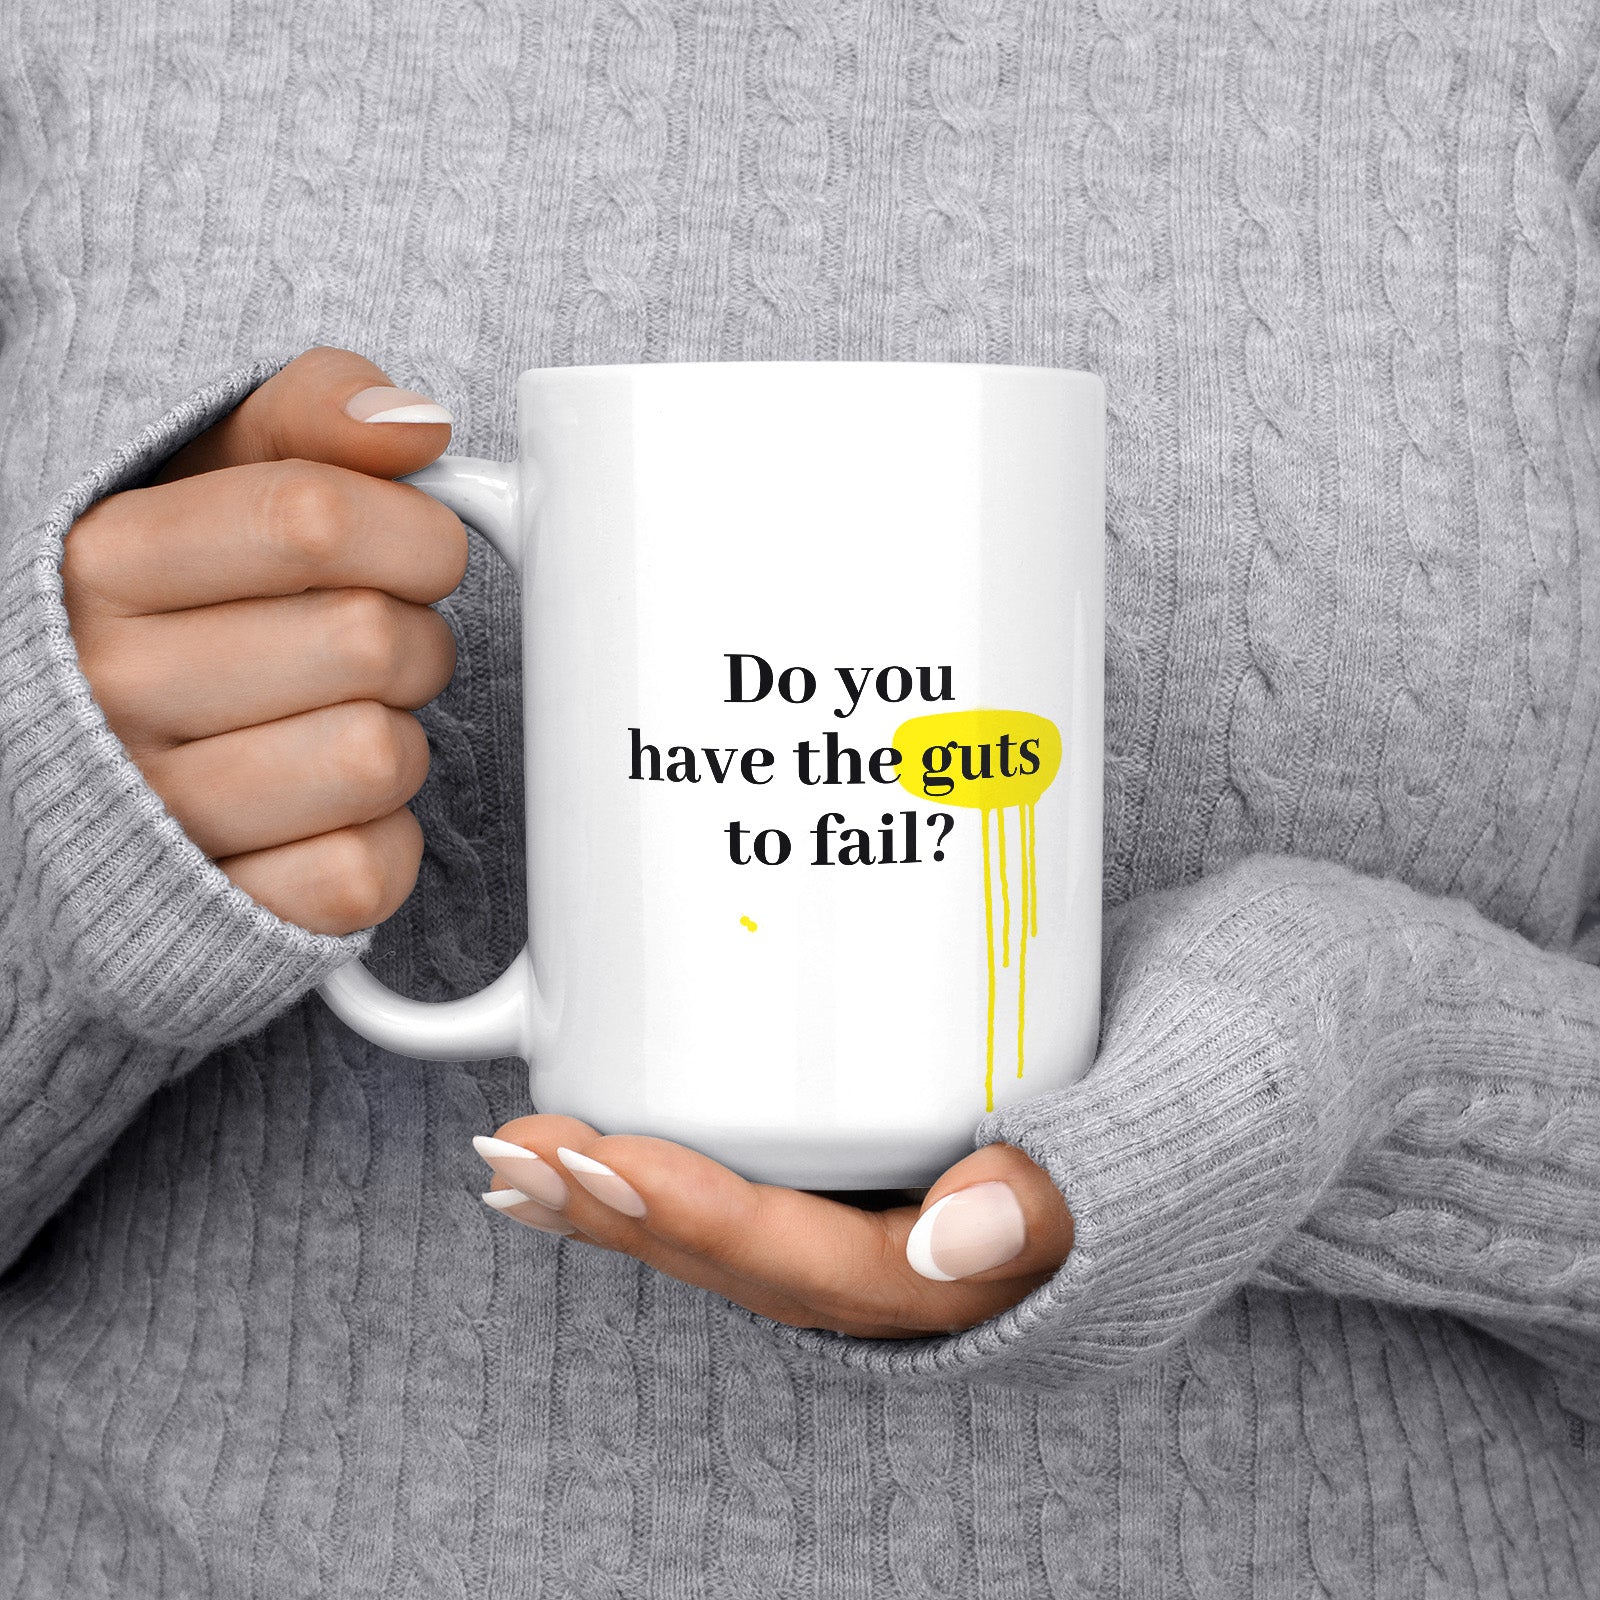 Be inspired by Denzel Washington's famous quote, "Do you have the guts to fail?" on this white and glossy 15oz coffee mug with the handle on the left.